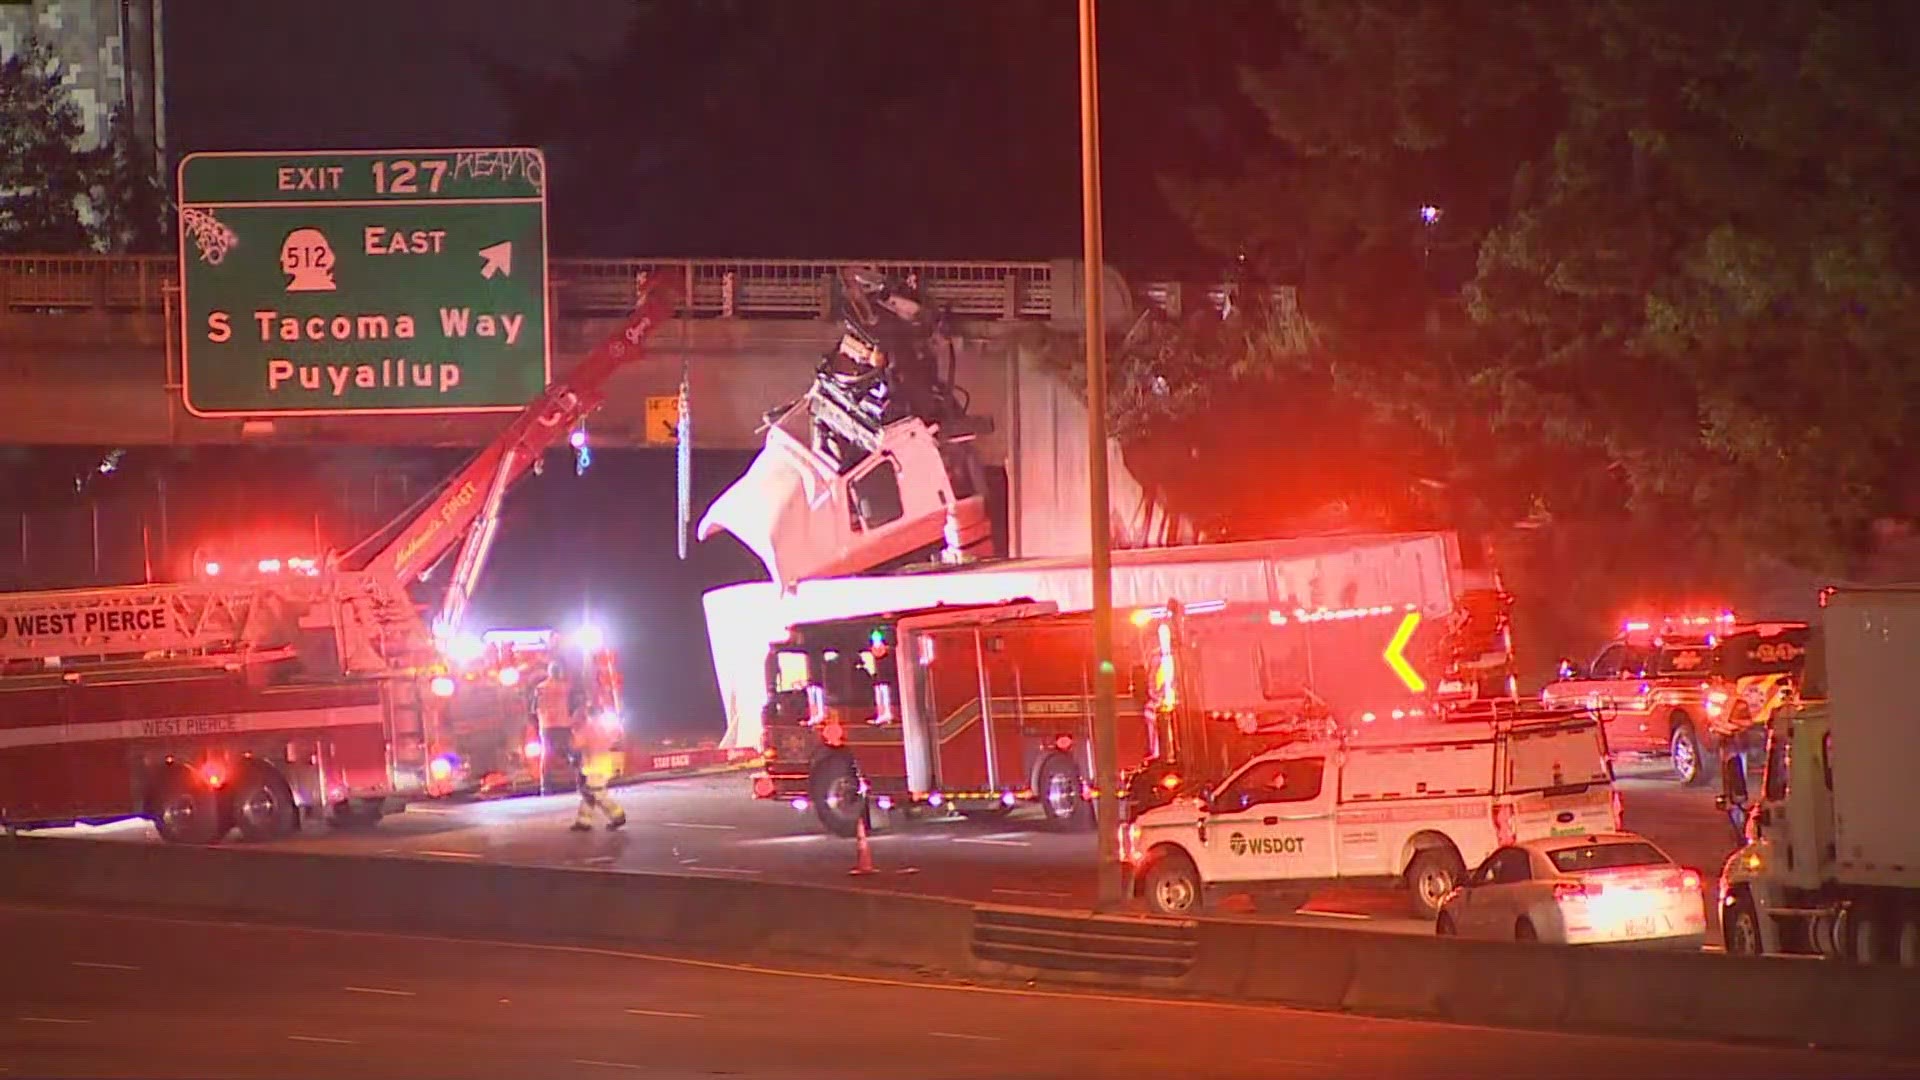 A semi truck going northbound on I-5 struck a jersey barrier and ended up on its side with the cab striking an overpass near exit 127 of I-5 N in Lakewood